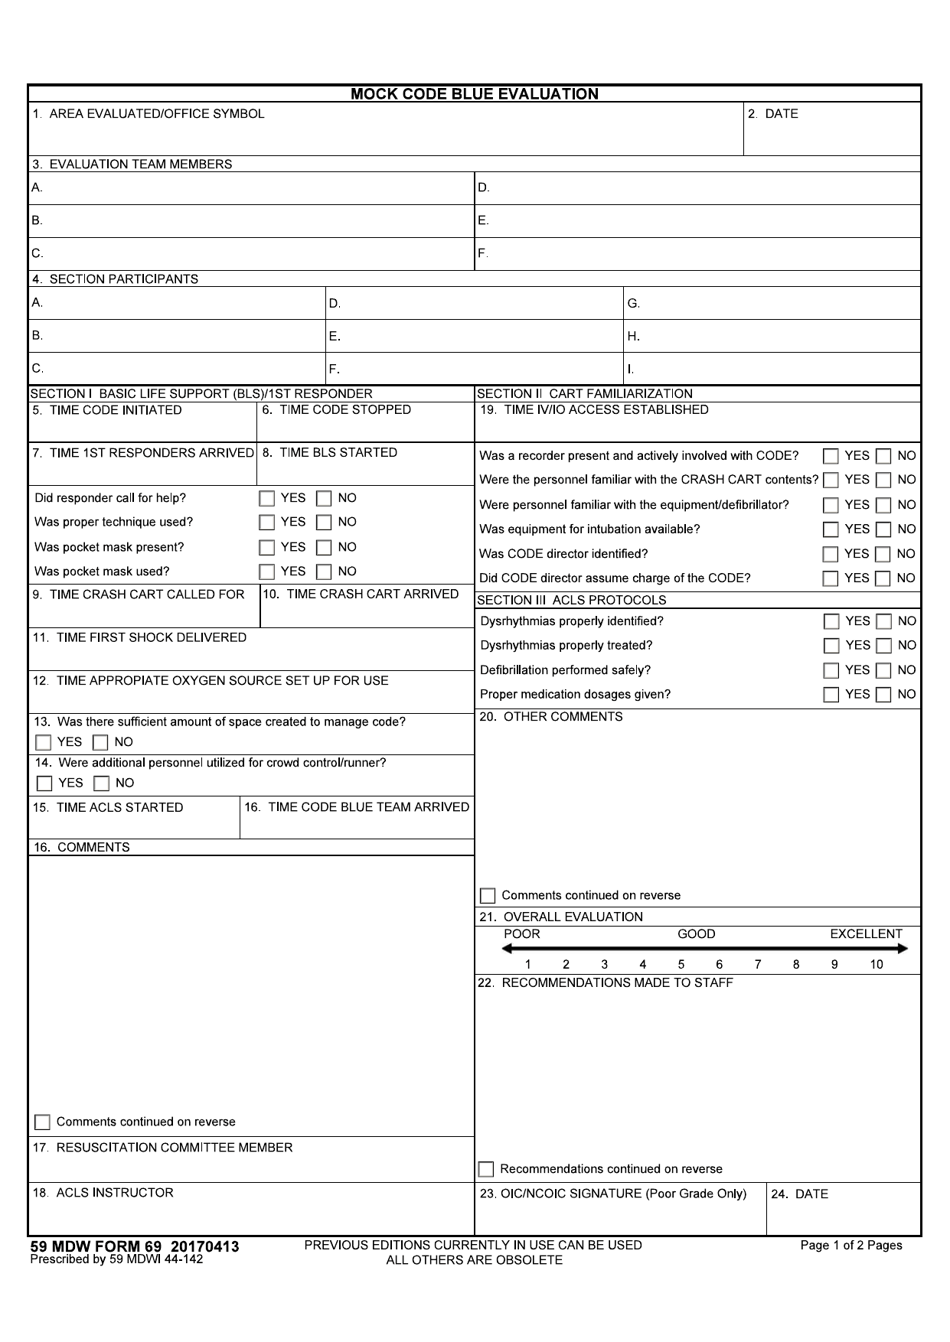 59 MDW Form 69 Mock Code Blue Evaluation, Page 1